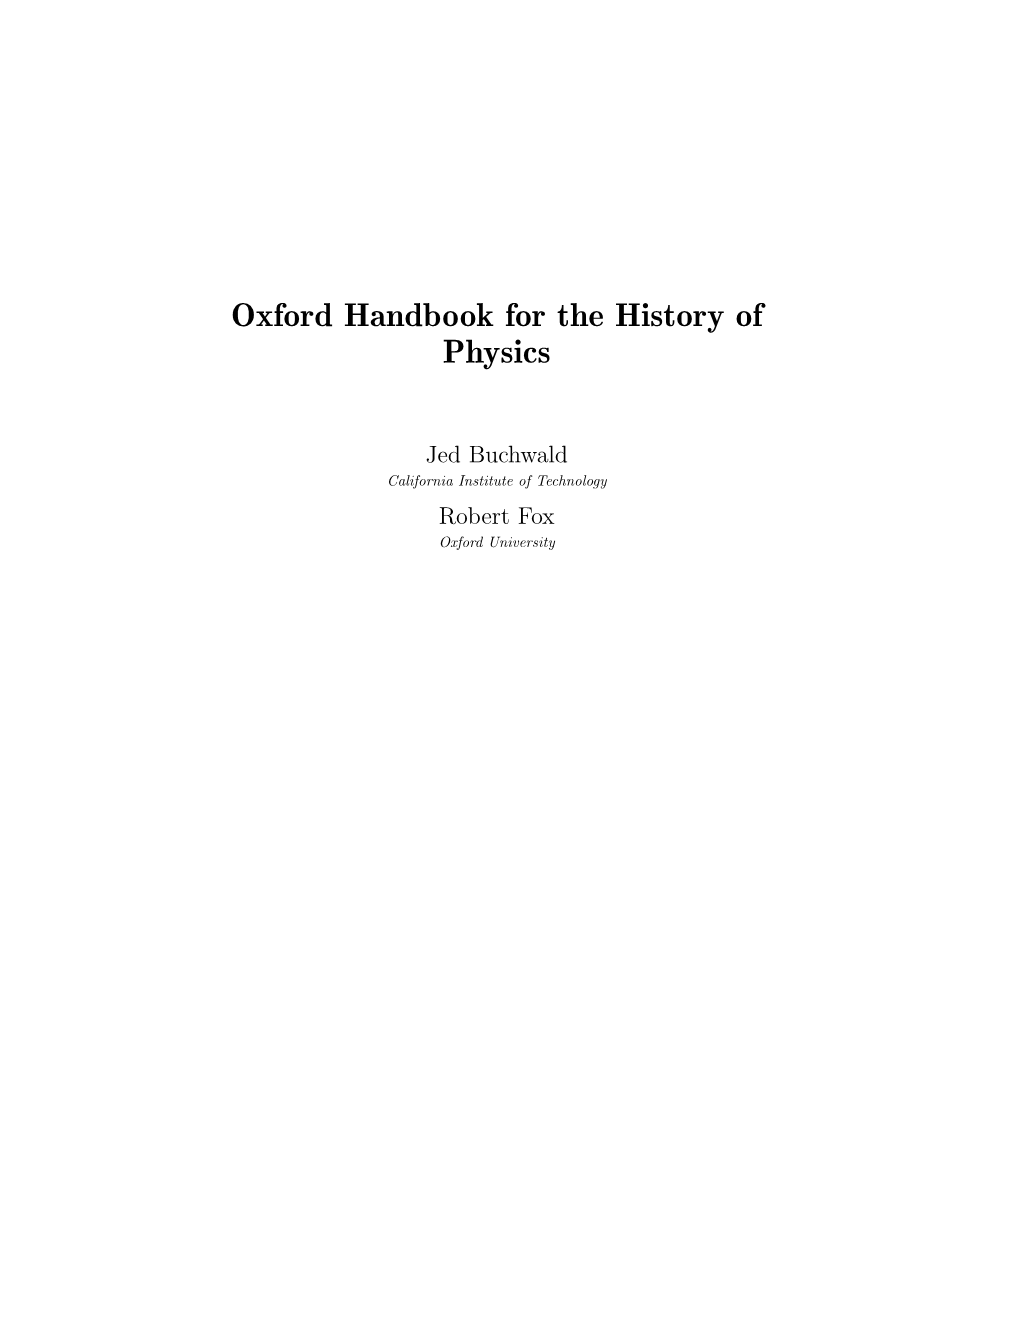 Oxford Handbook for the History of Physics